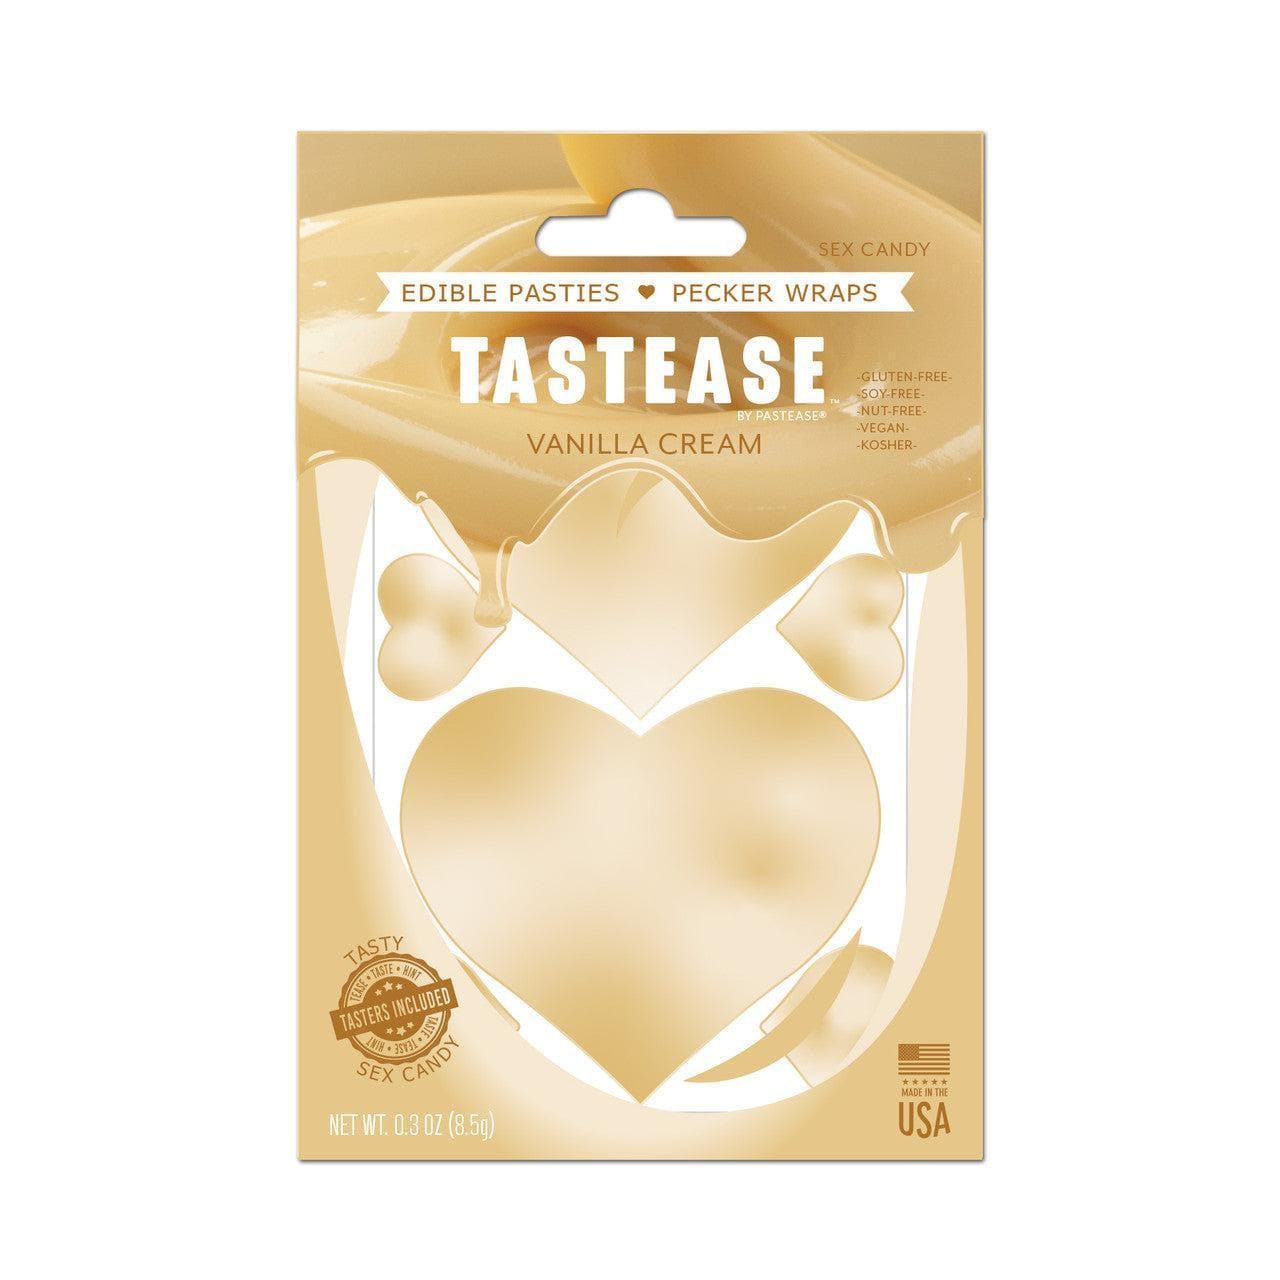 Tastease by Pastease Sweet Cream Candy Edible Pasties & Pecker Wraps - Romantic Blessings